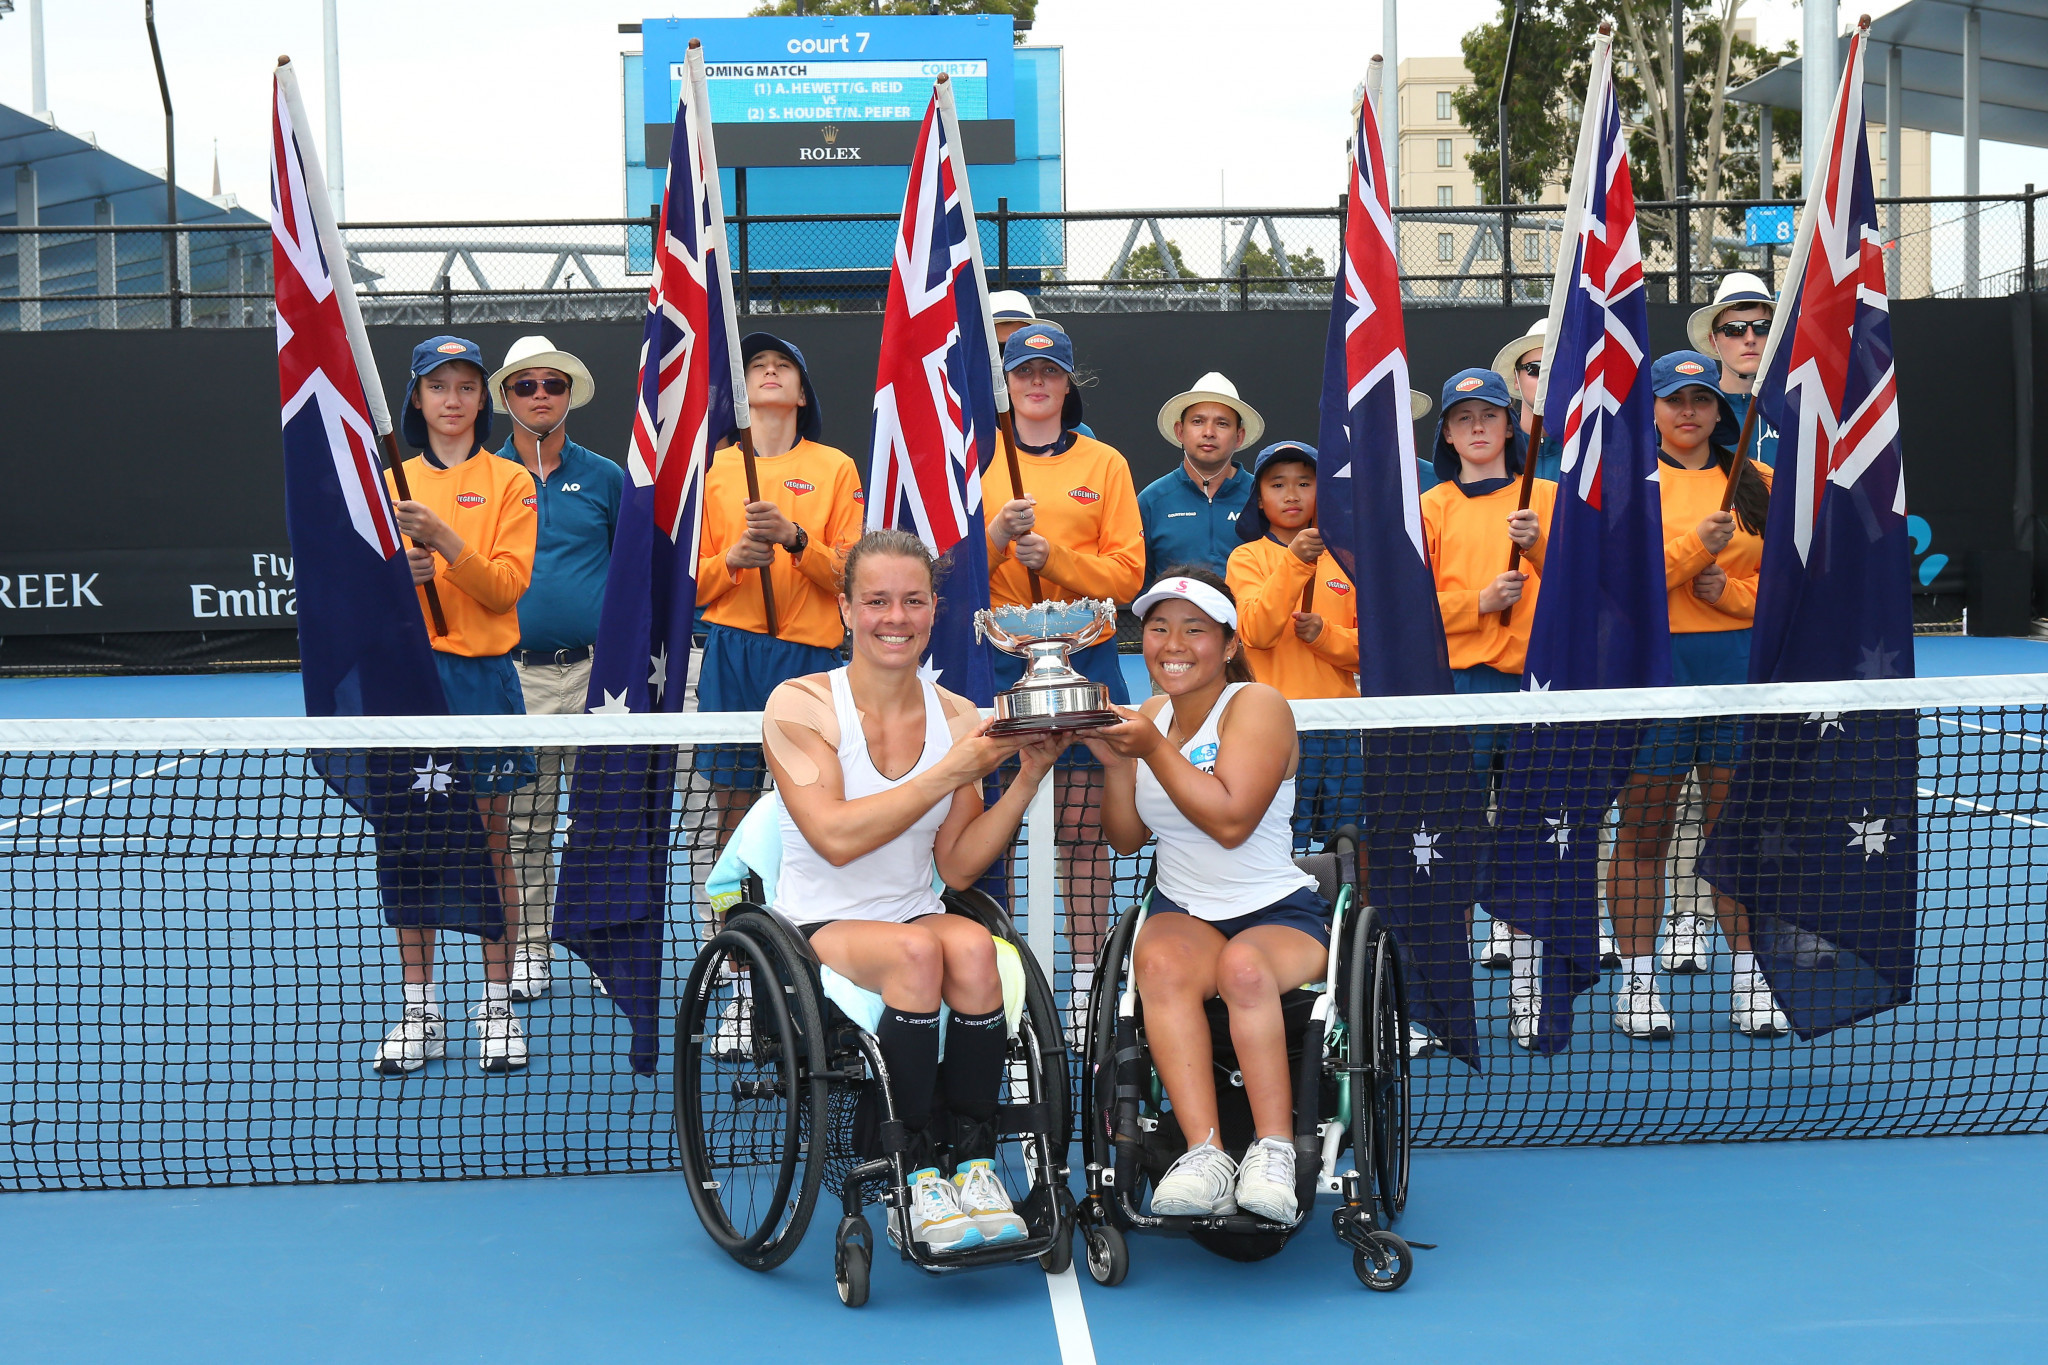 Marjolein Buis and Yui Kamiji eased to the women's doubles crown ©Getty Images